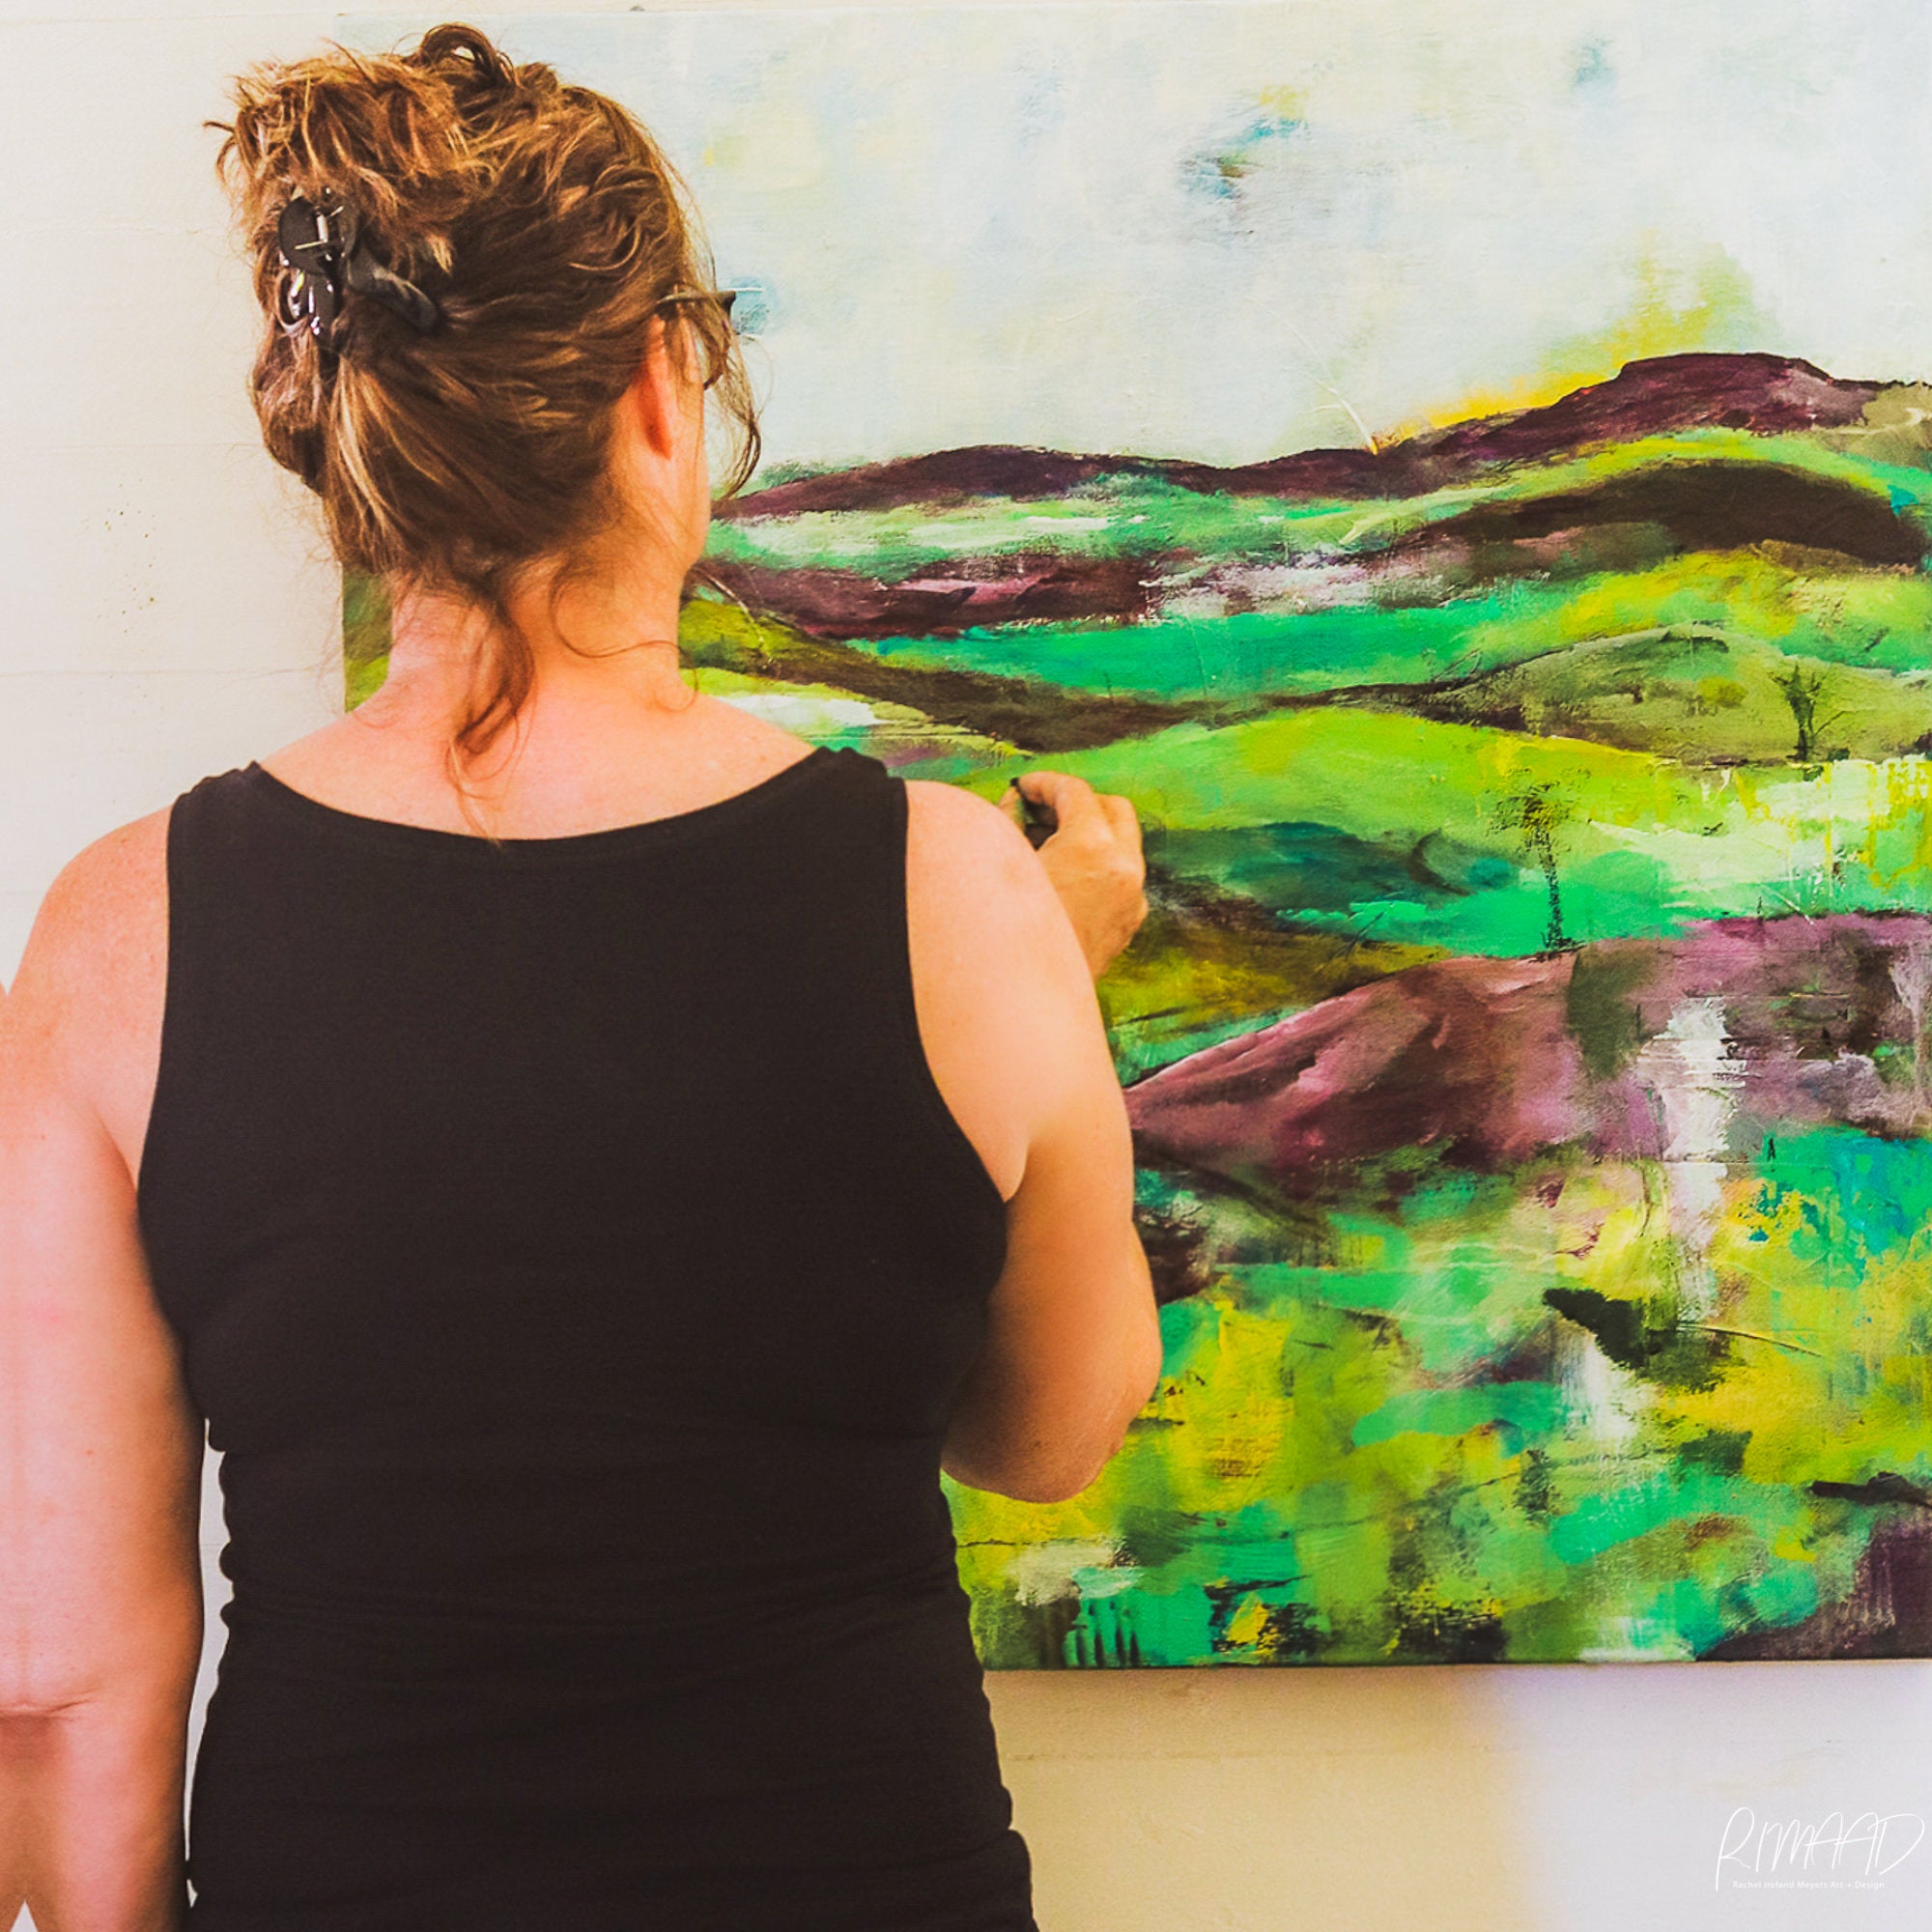 This is a photo of a woman in front of a canvas, painting. This is artist, Rachel Ireland Meyers at RIMAAD, Far North Queensland, Australia